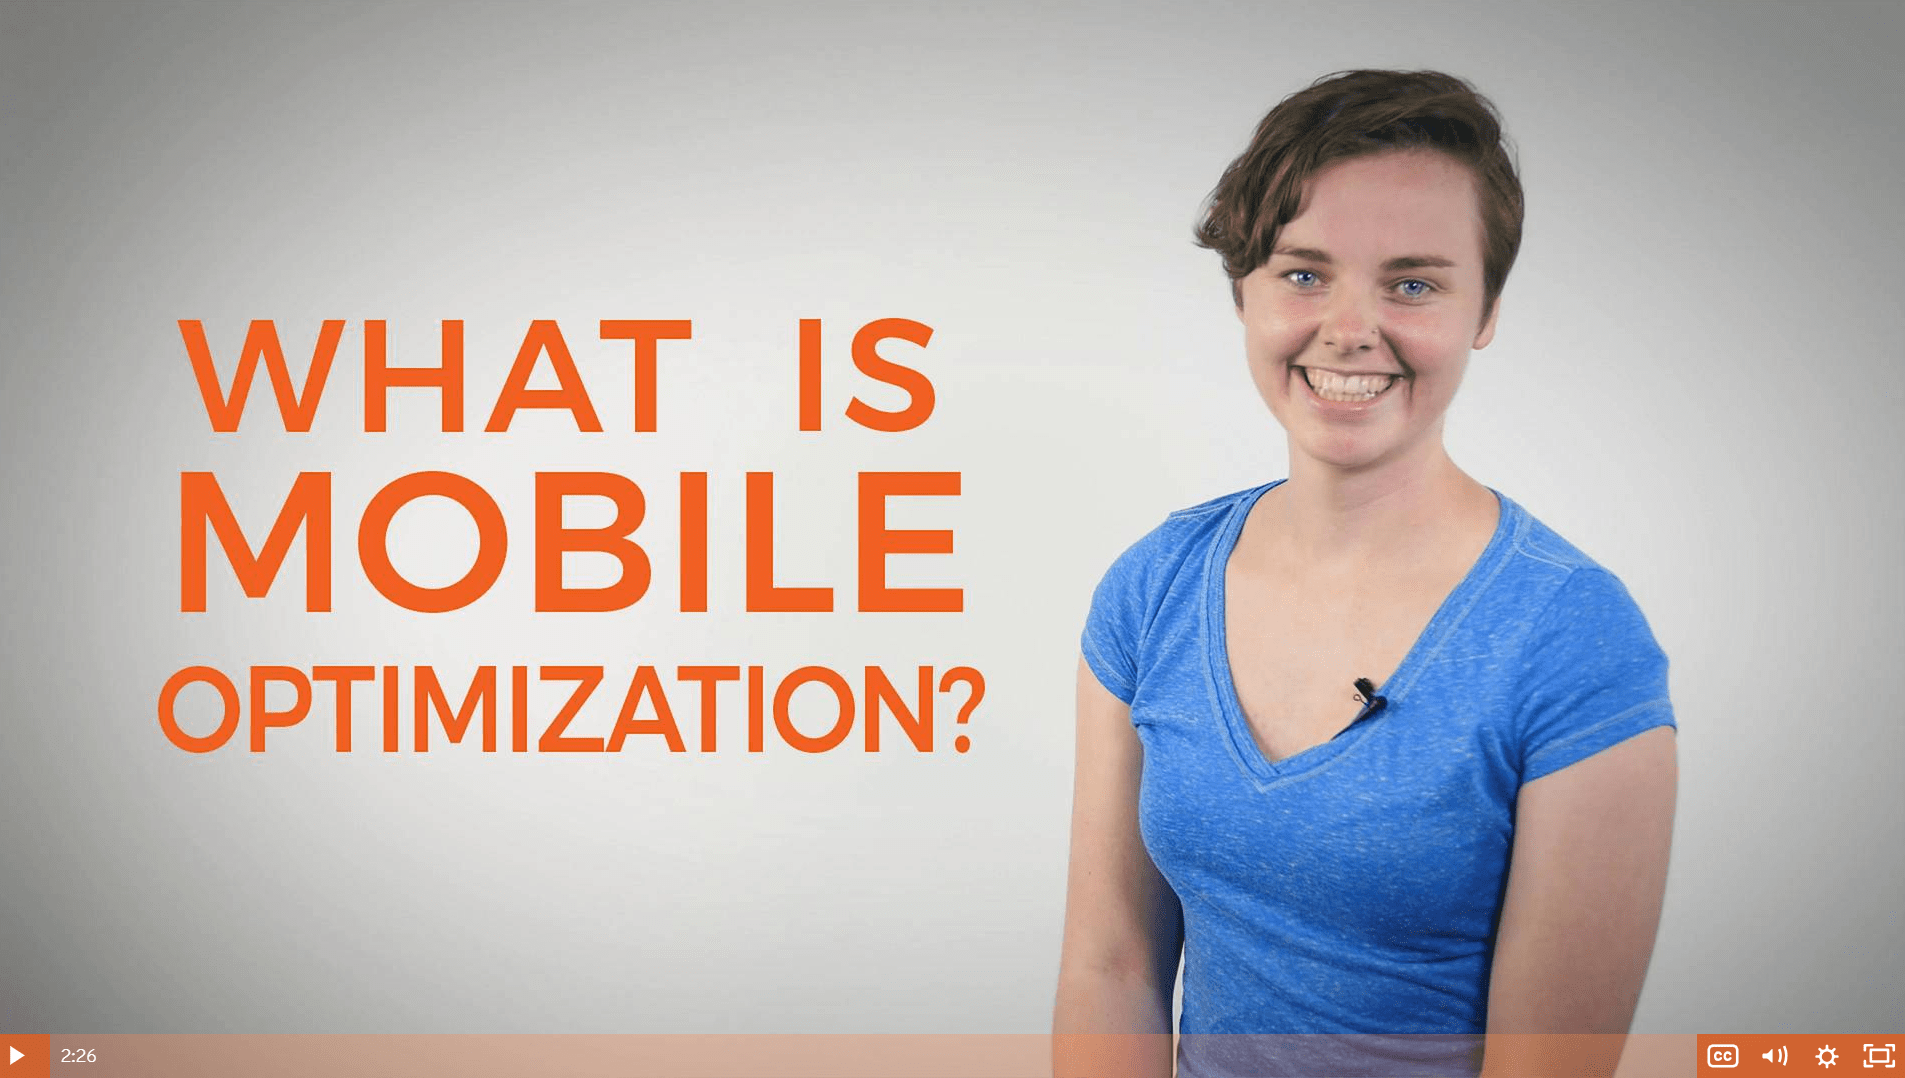 What is mobile optimization?